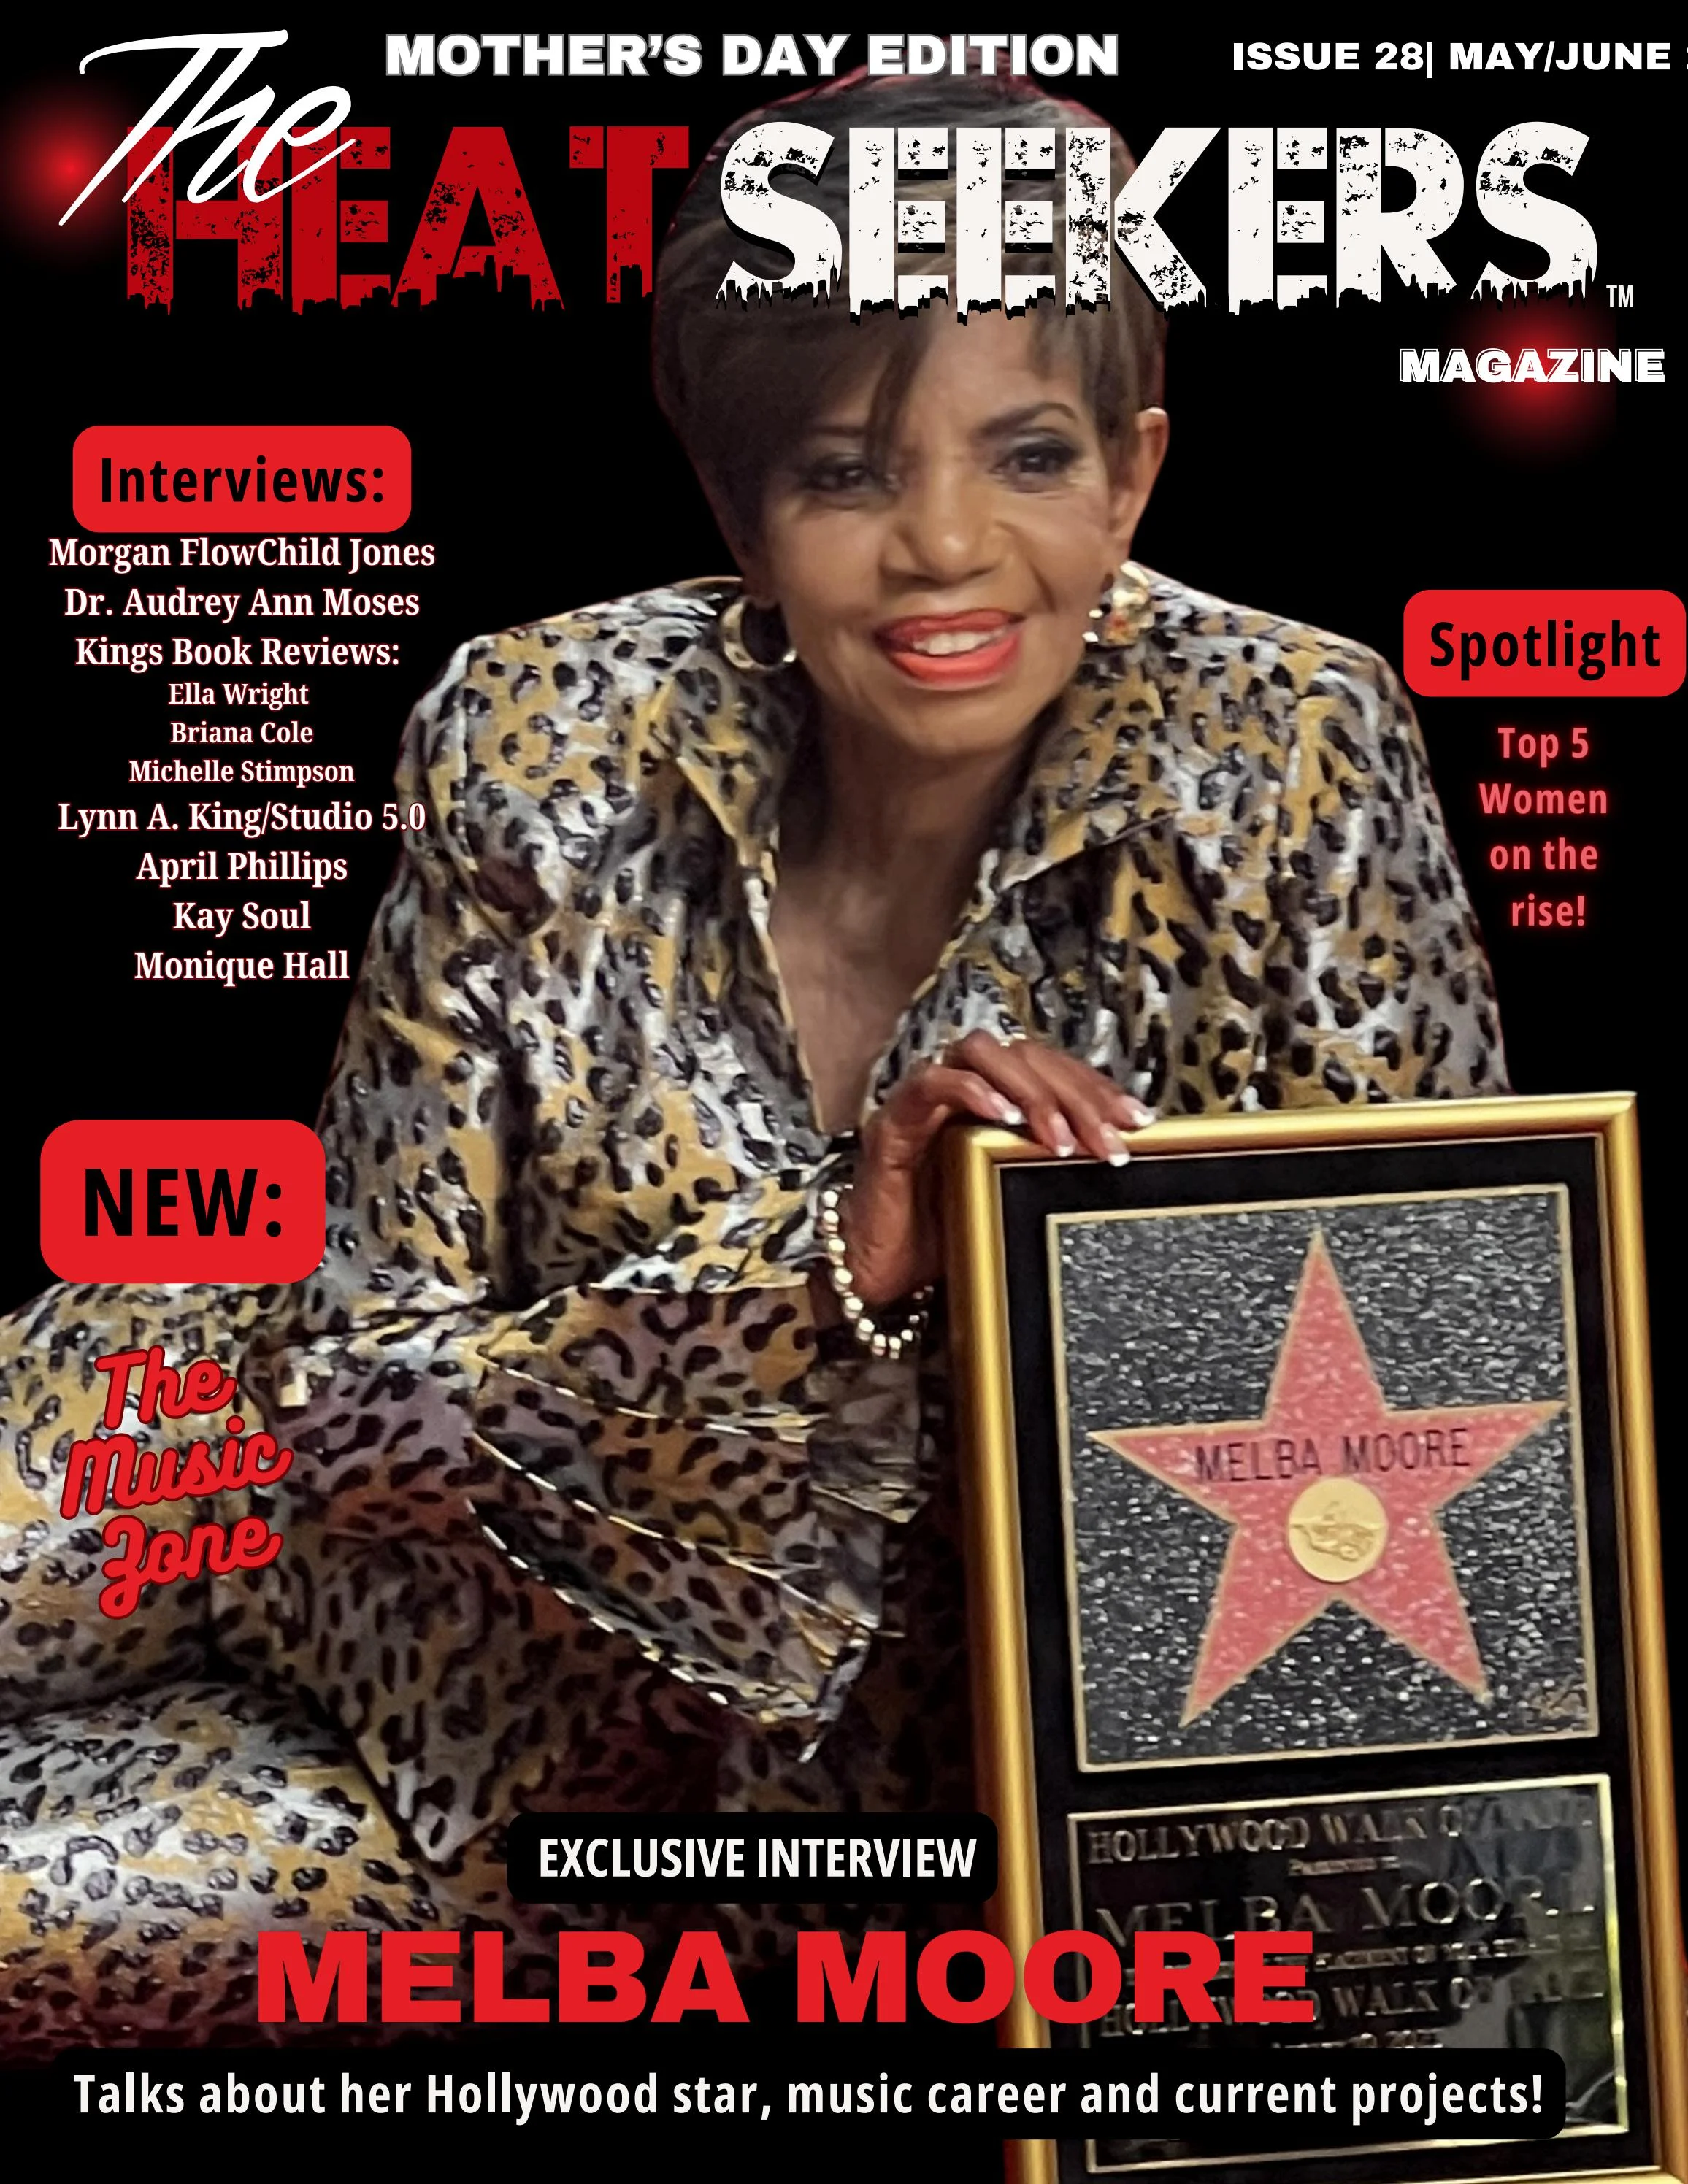 A woman in leopard print jacket holding up her star.